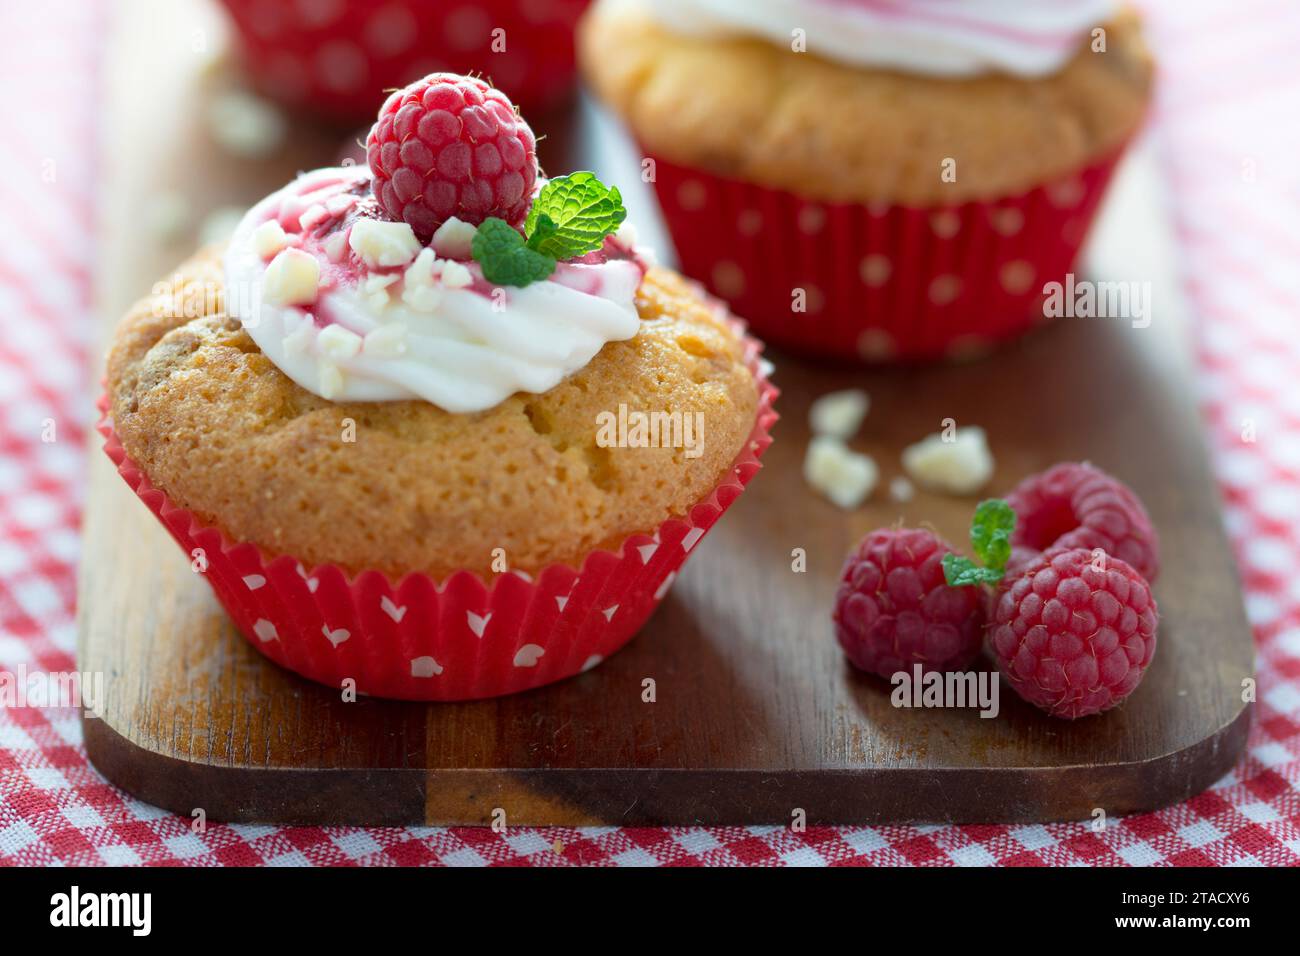 Homemade delight for refined palates: dive into the sweet temptation of raspberry cupcakes with white chocolate icing. An explosion of artisanal flavo Stock Photo